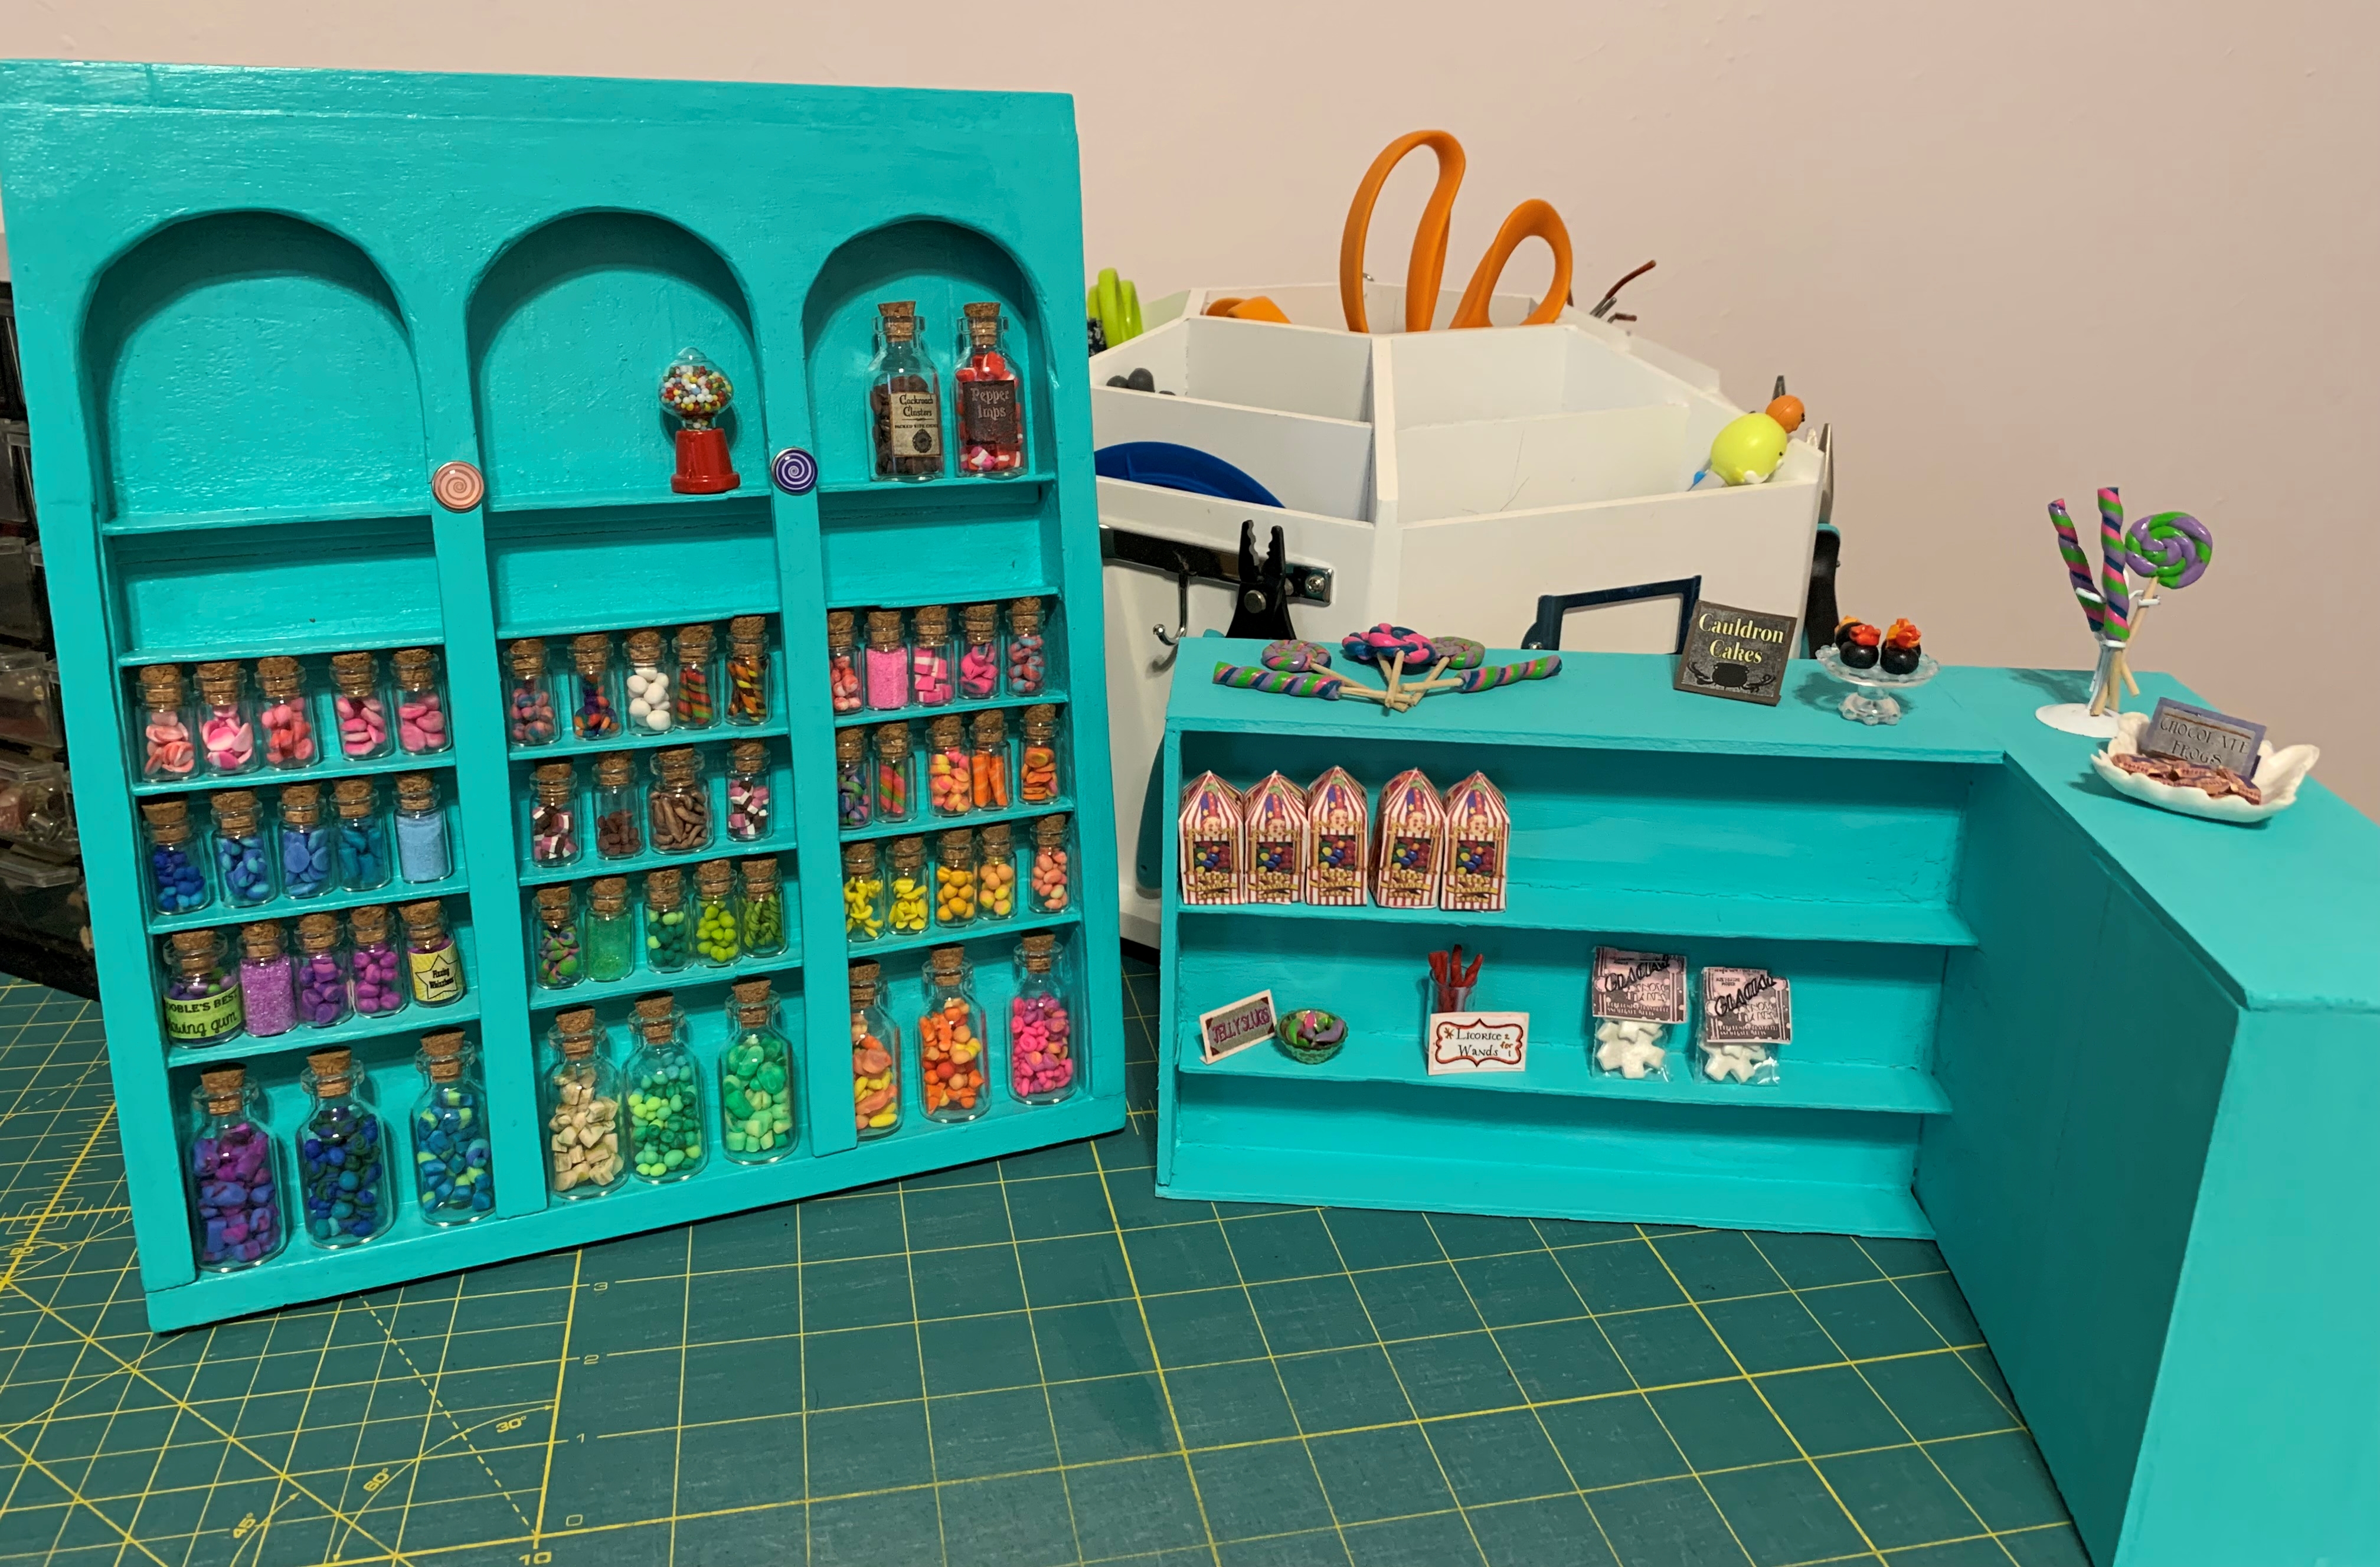 A turquoise floor to ceiling shelf and counter for a miniature candy shop. The shelves are partly filled with jars and packs of candy. 